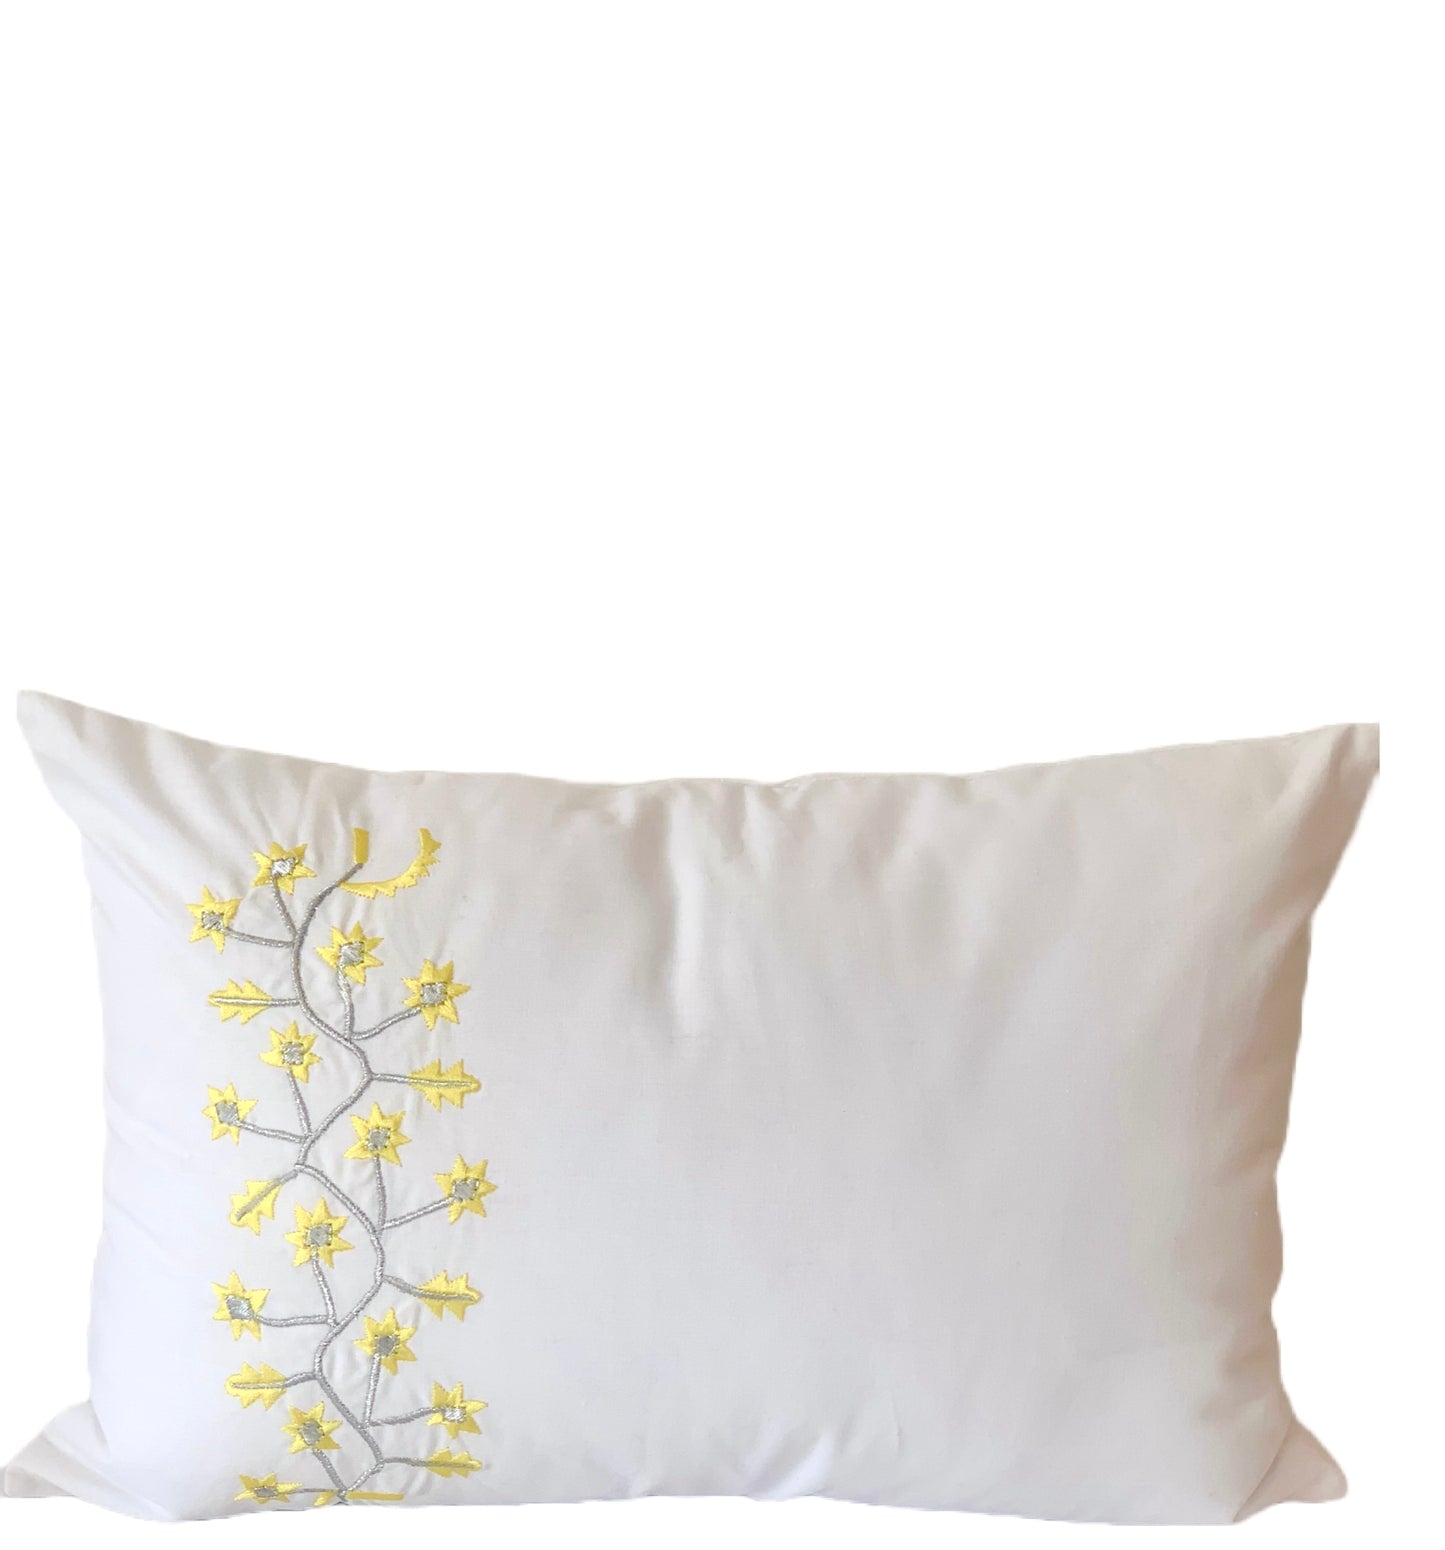 Small embroidered pillow